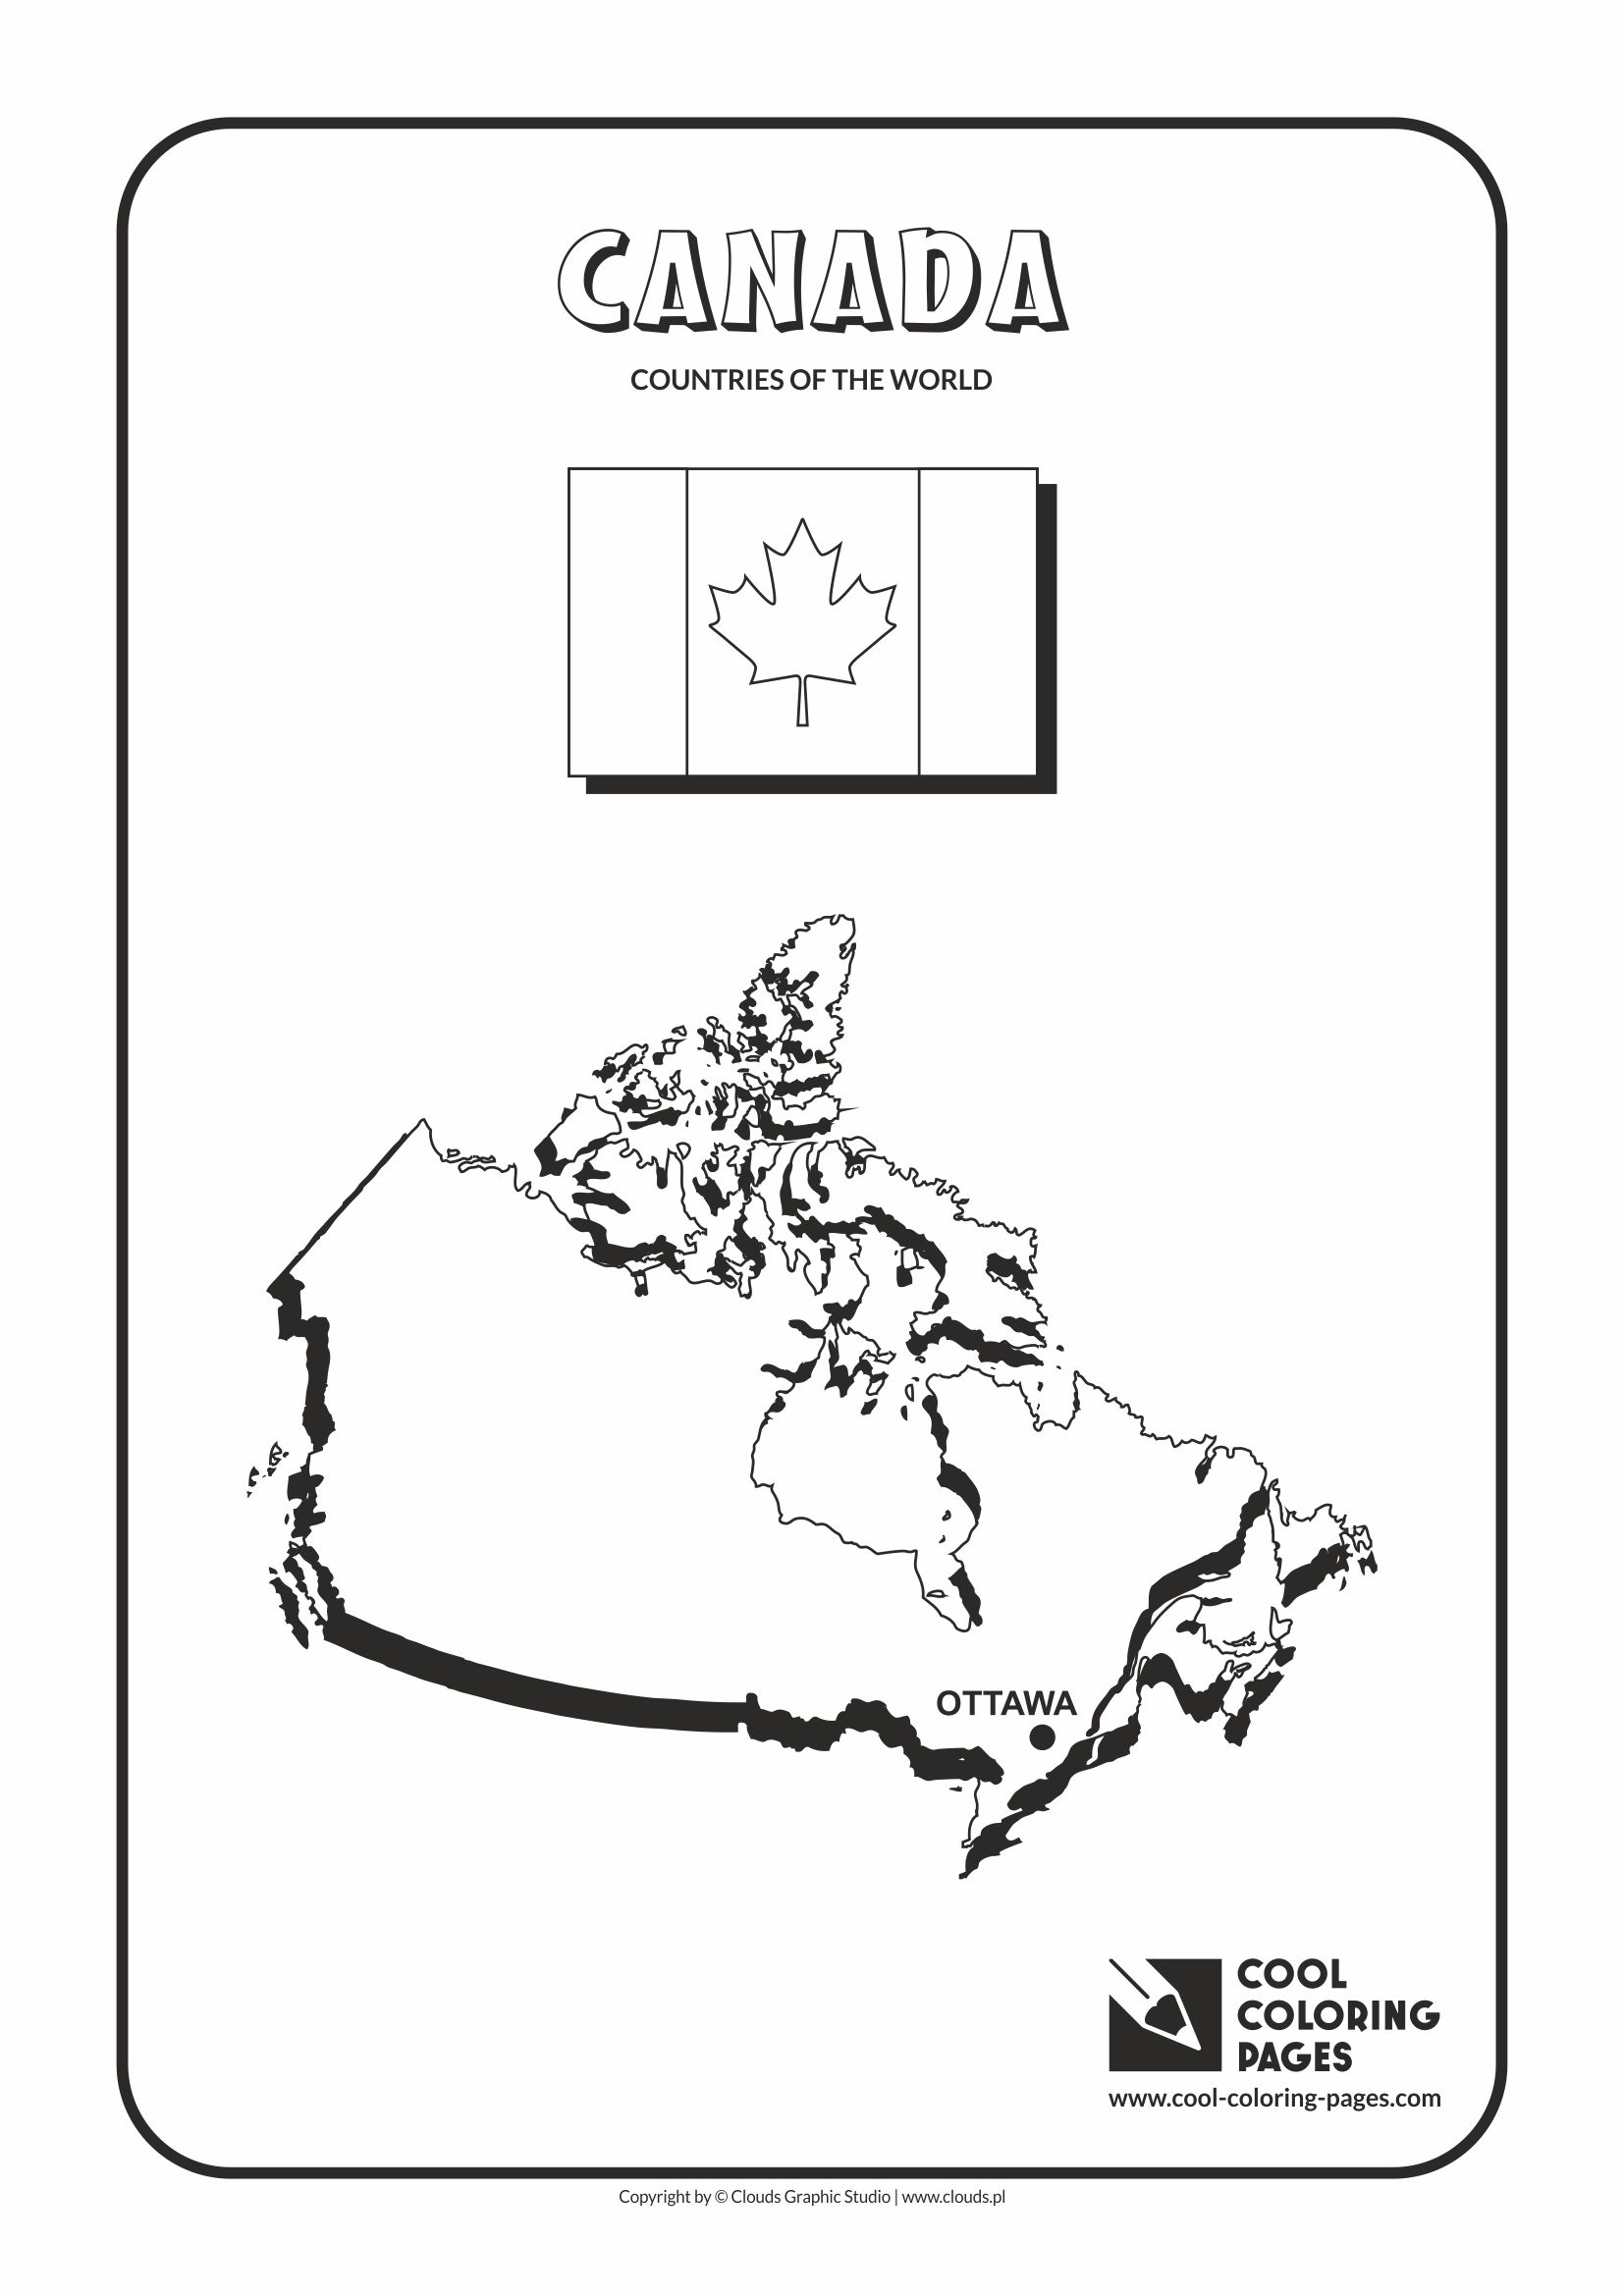 Cool Coloring Pages - Countries of the world / Canada